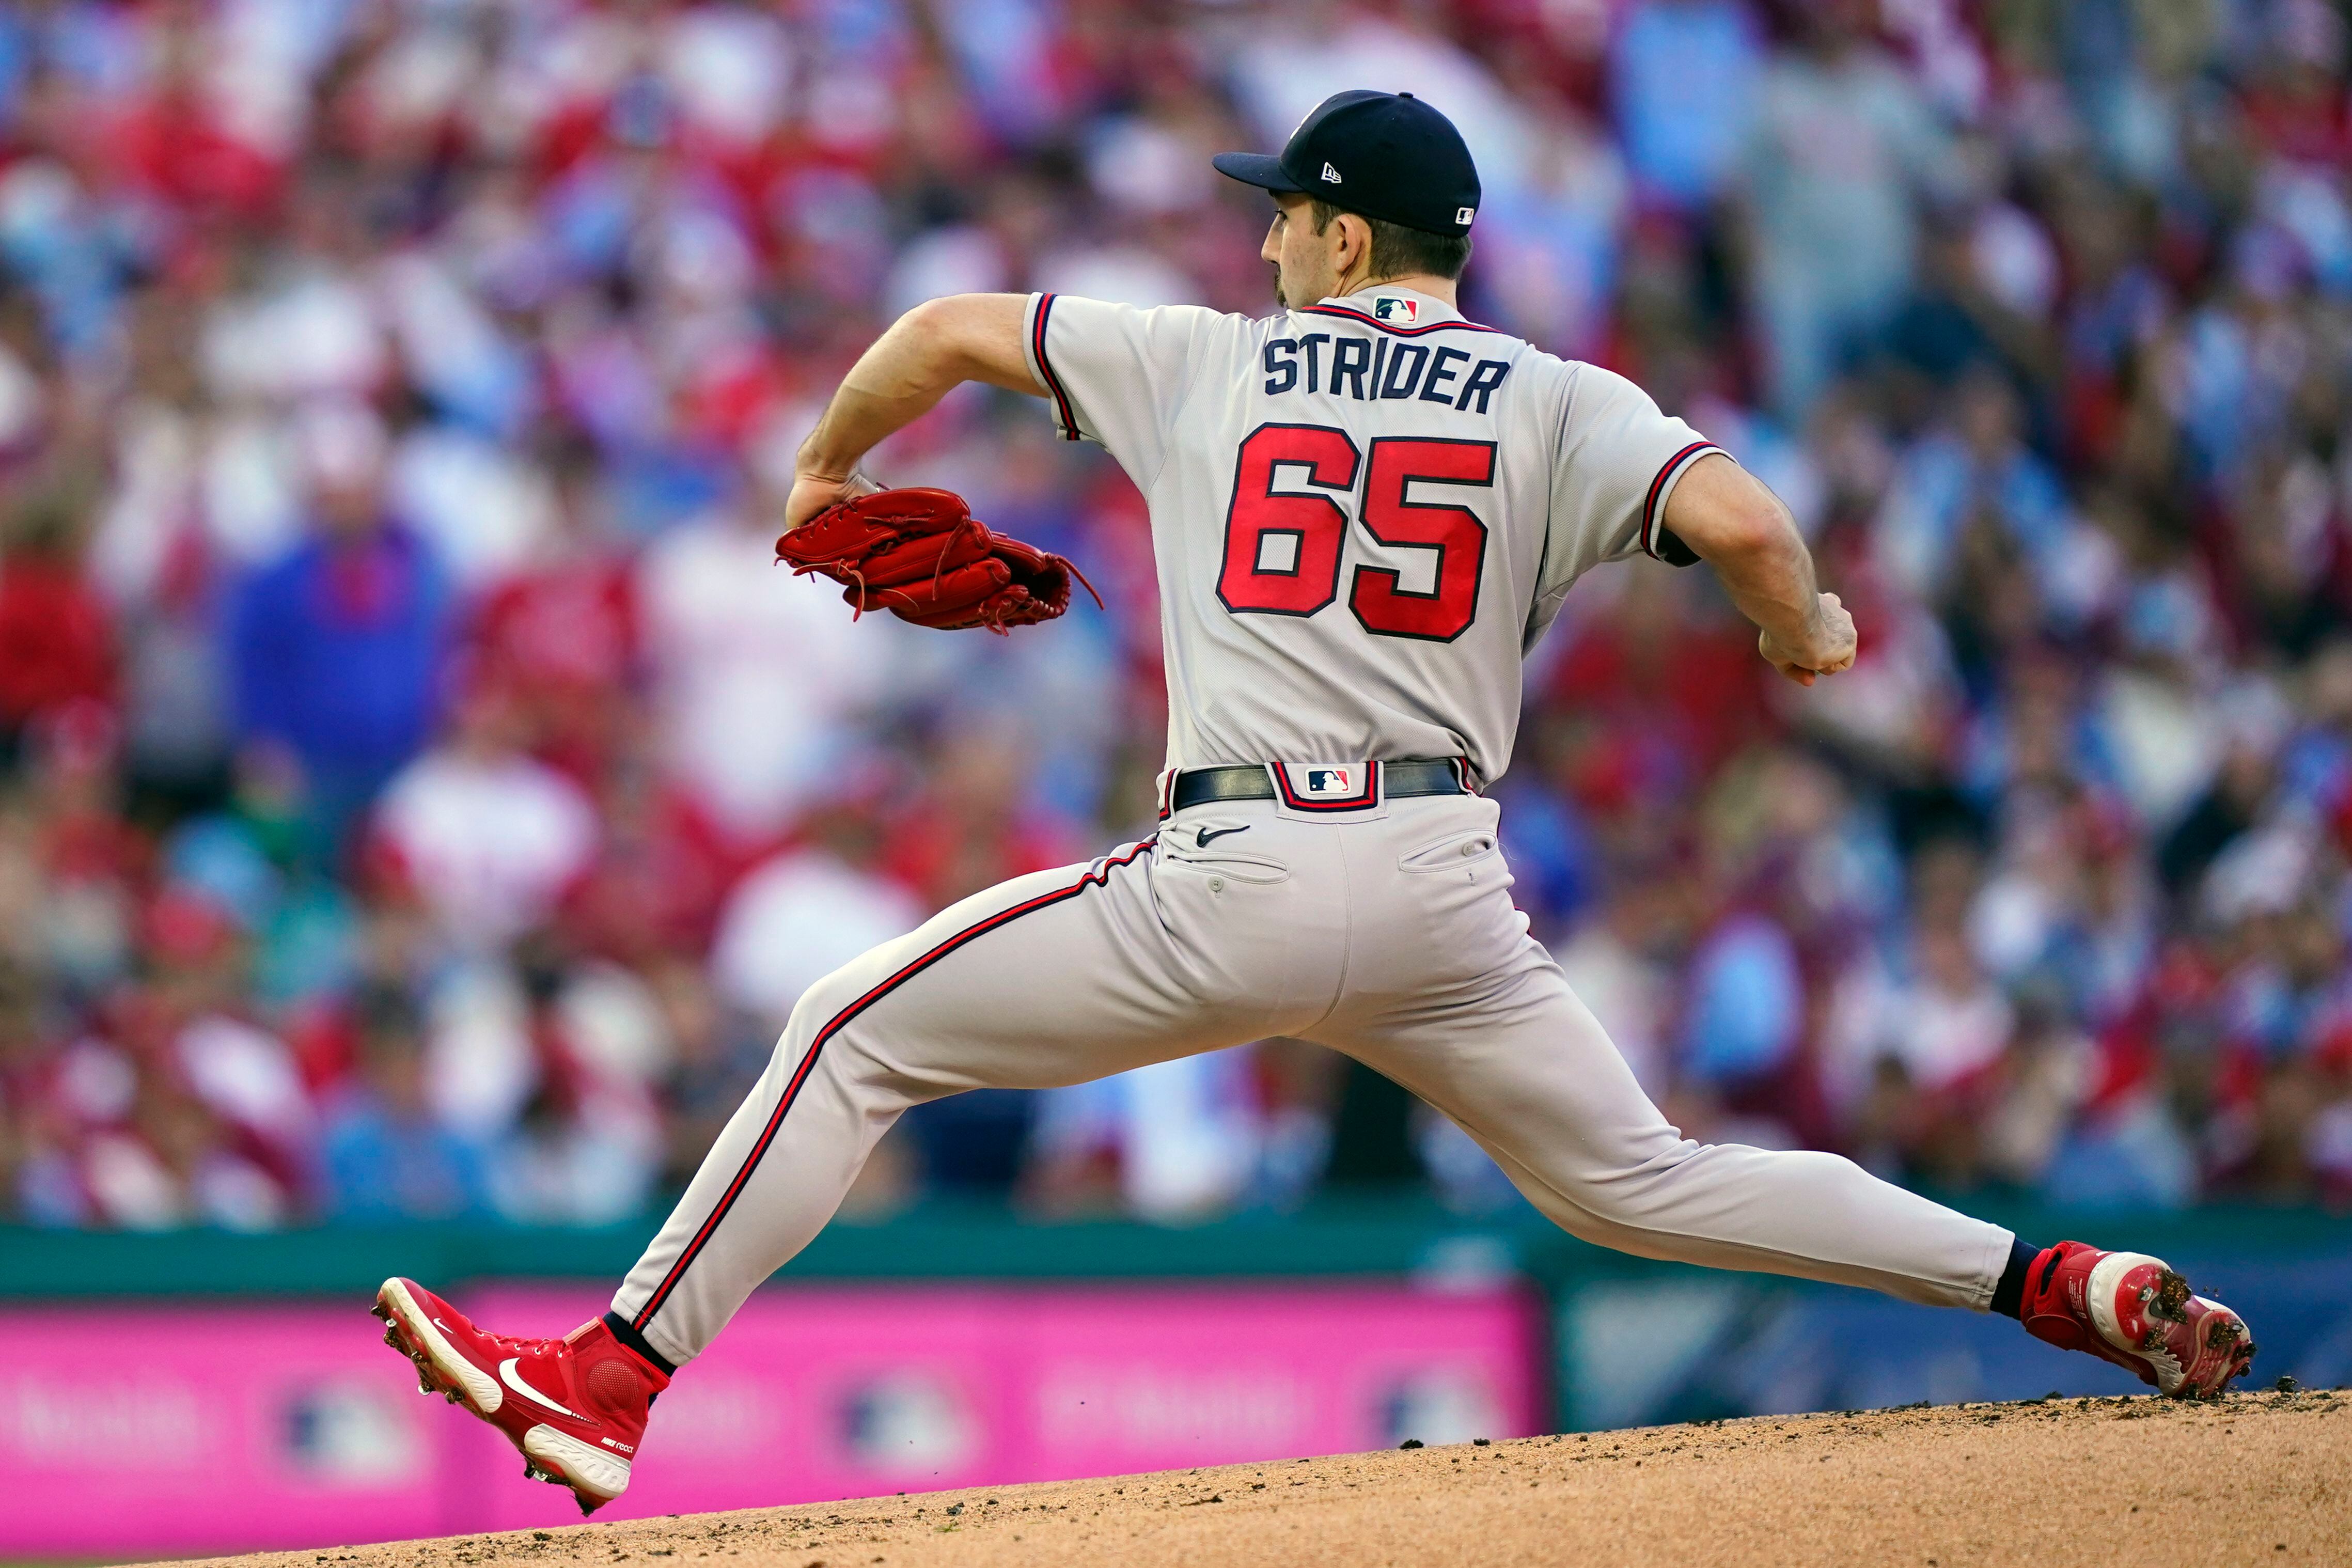 Braves rookie Strider tagged in return, Phils win, lead NLDS